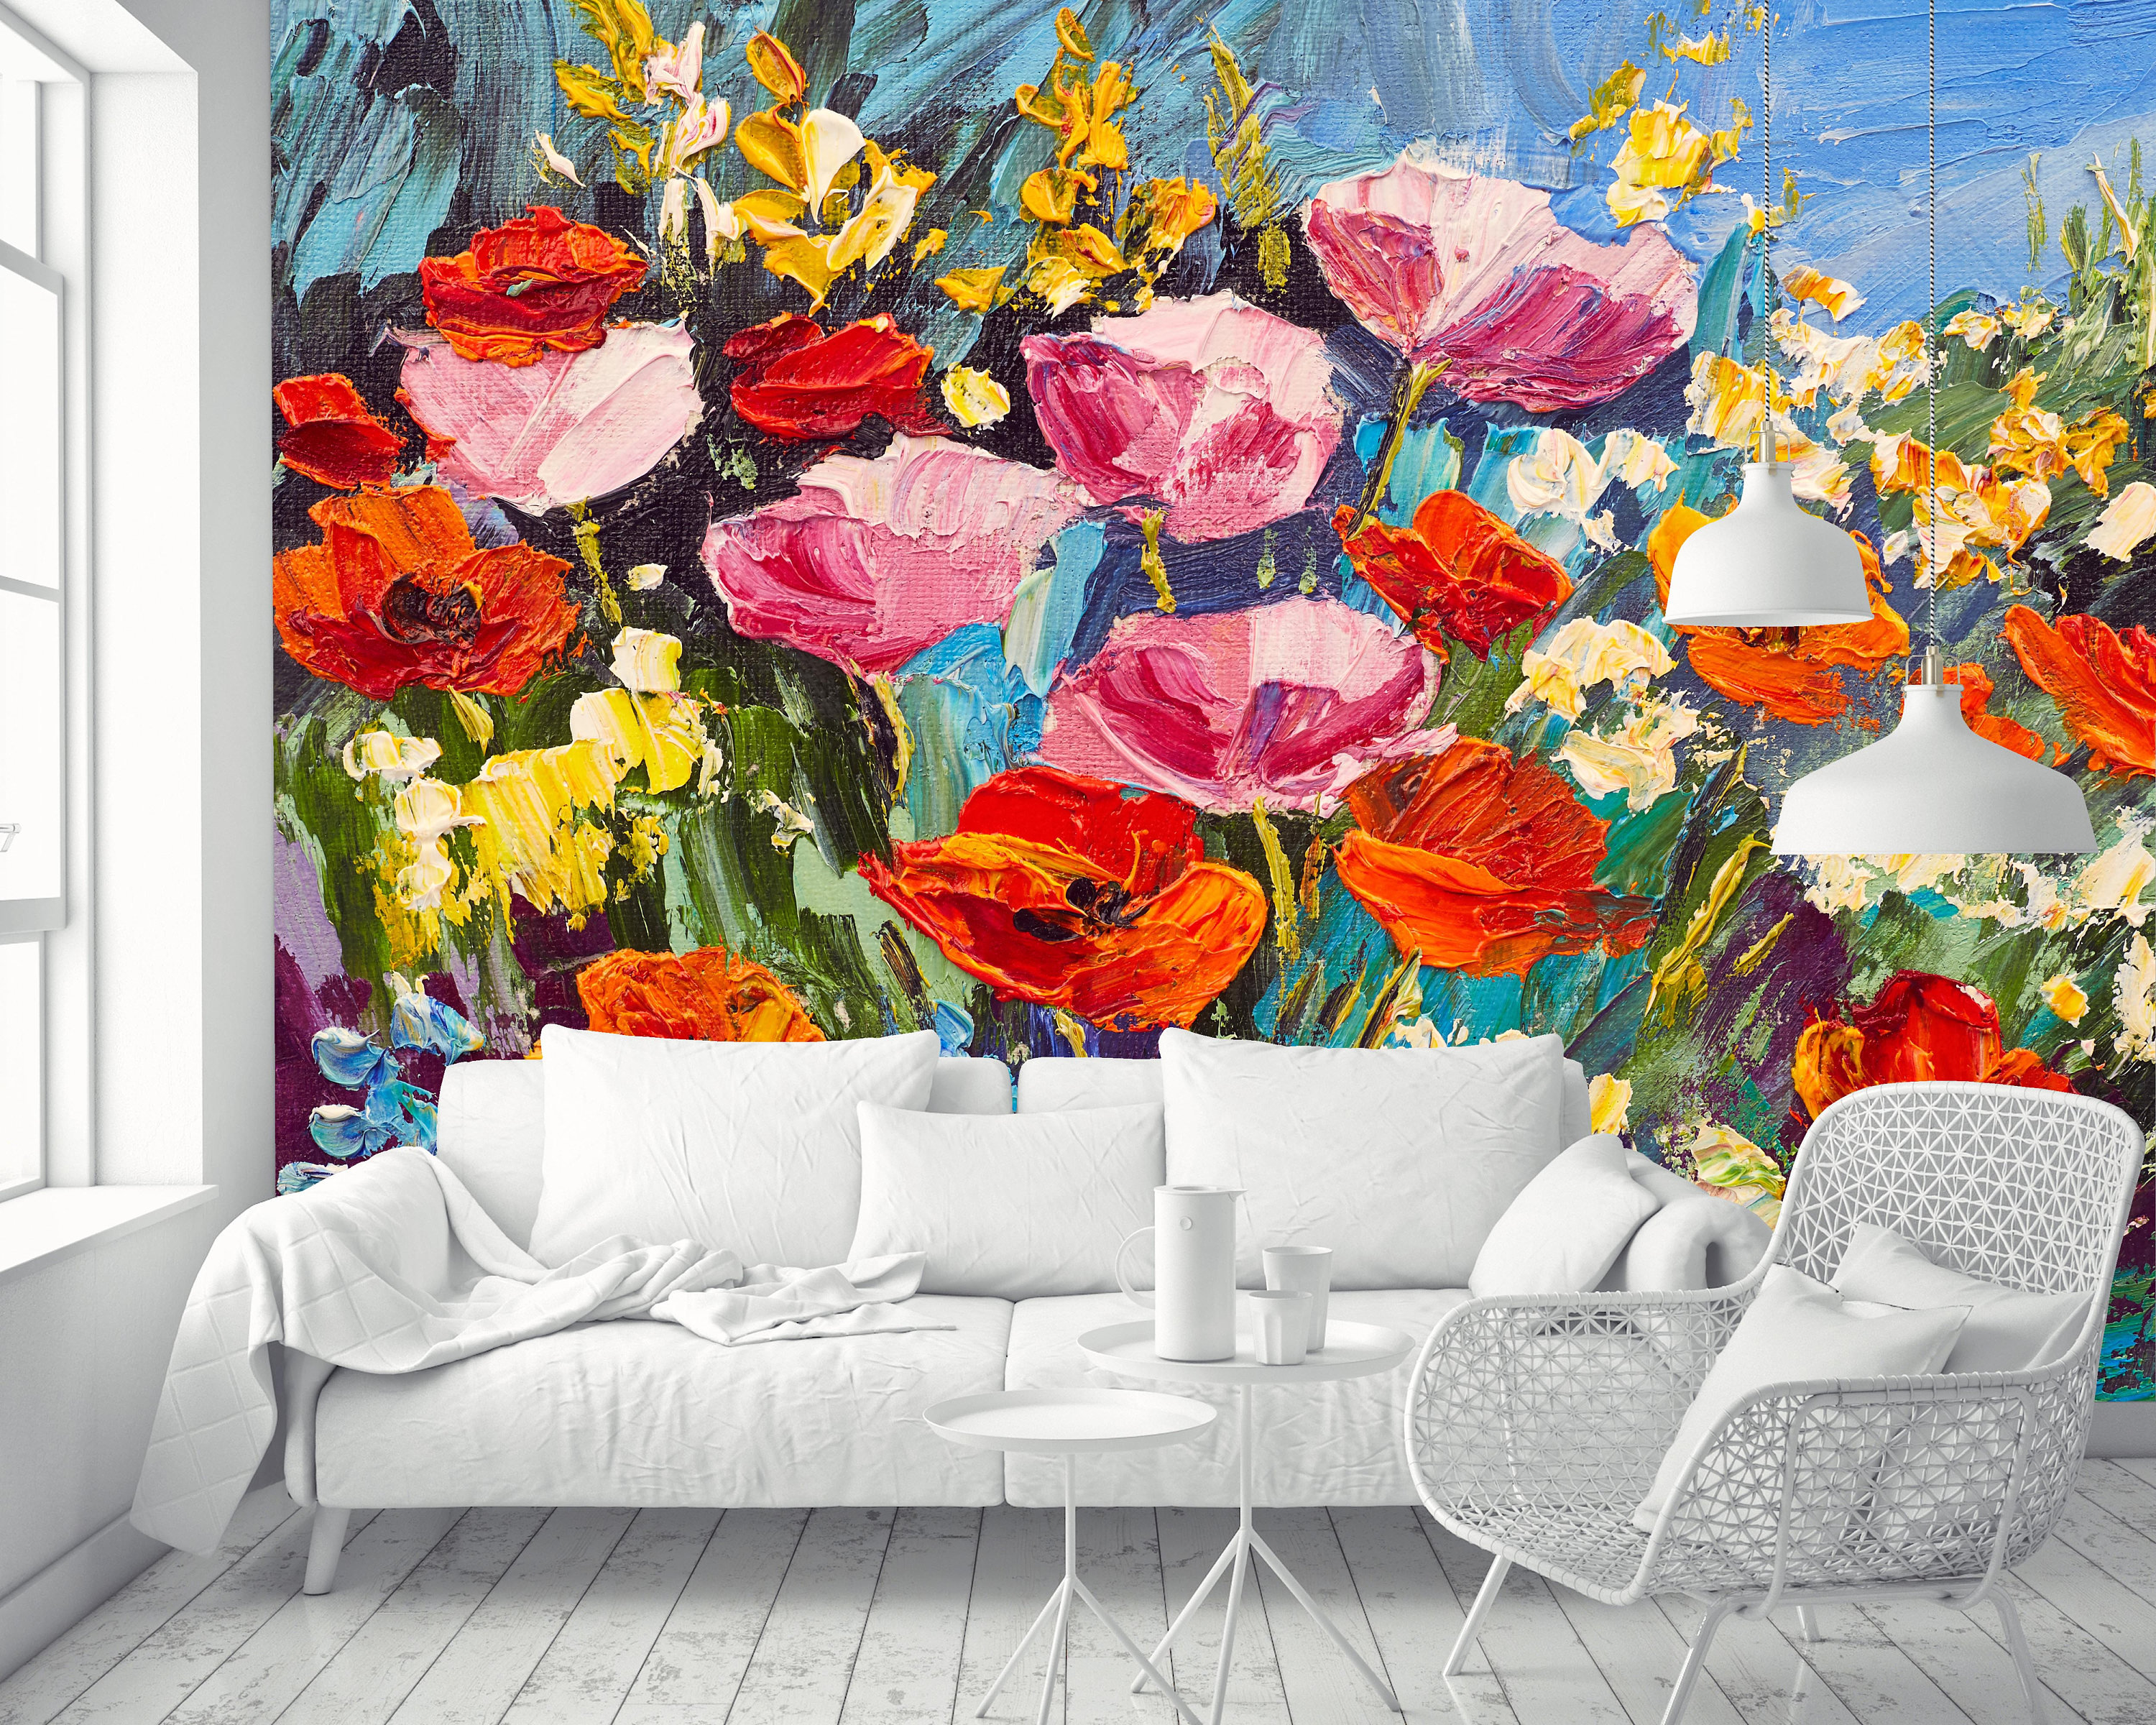 wallcovering Field of poppies on a sunset       wallmural repositonable photomural mural photo Poppies Field traditional or removal mural